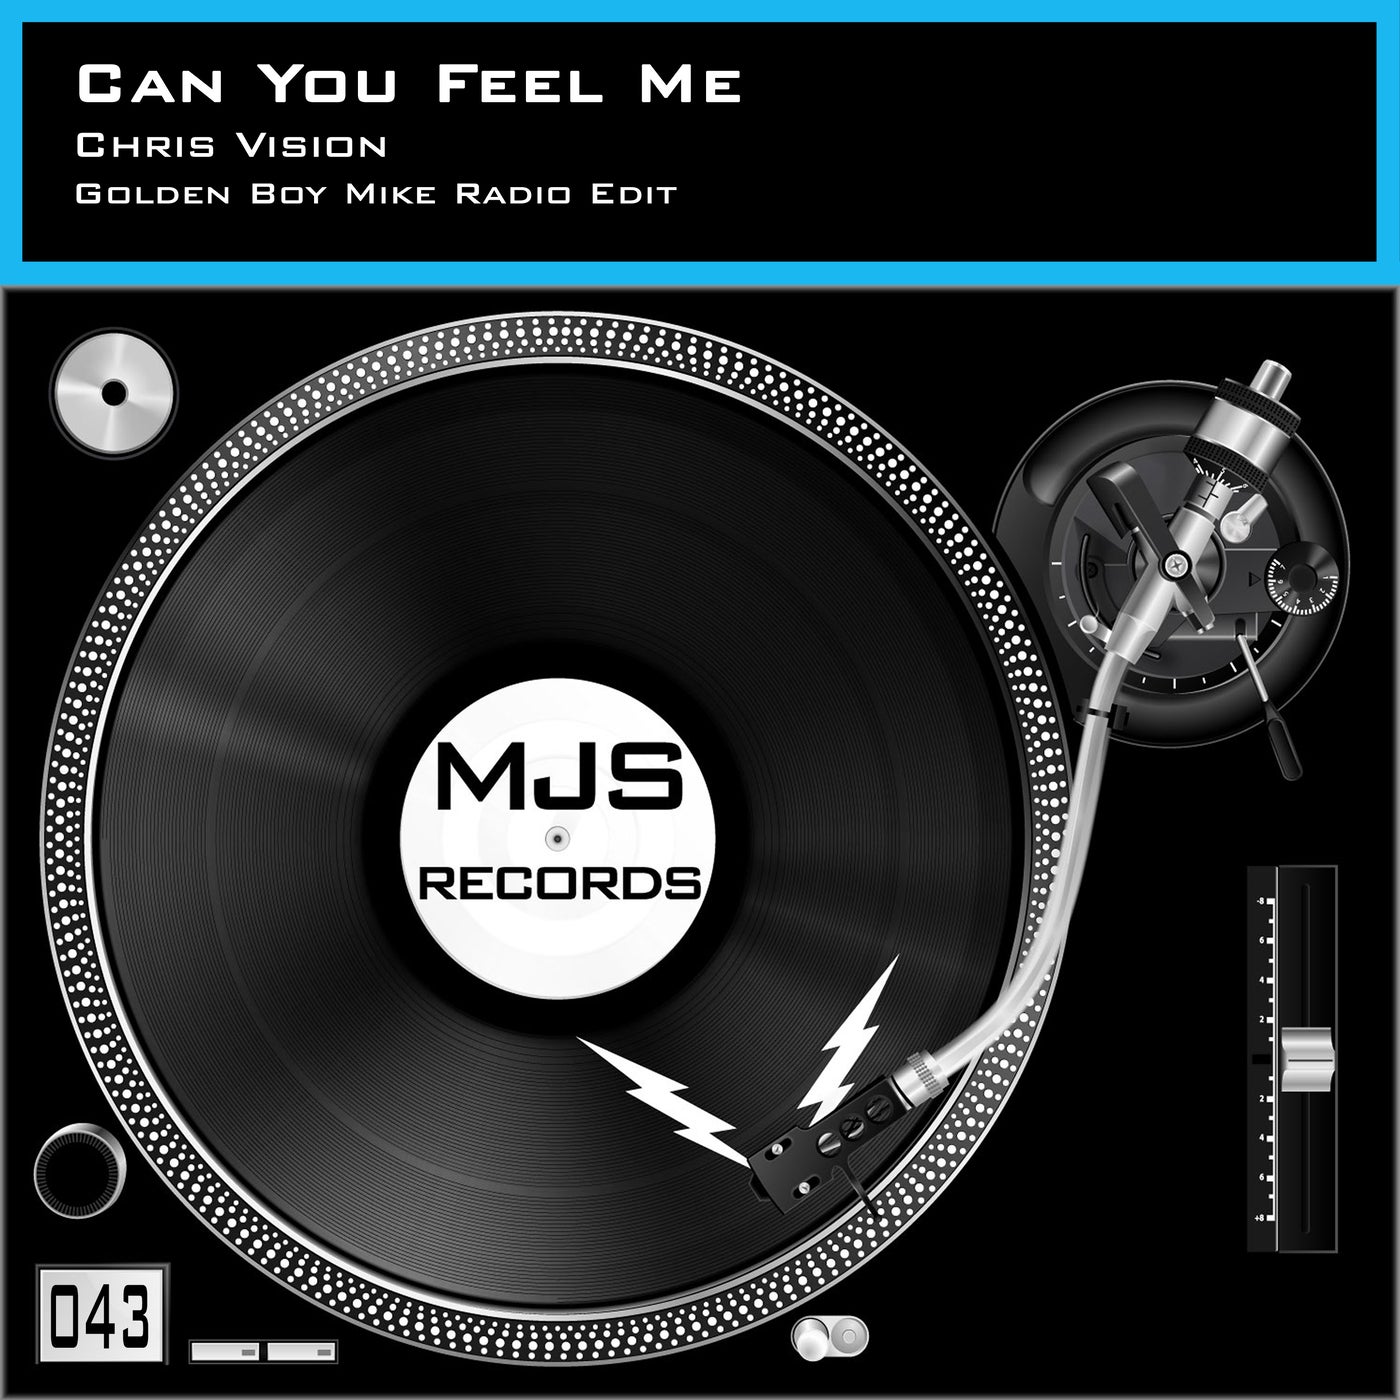 Can You Feel Me (Golden Boy Mike Radio Edit)